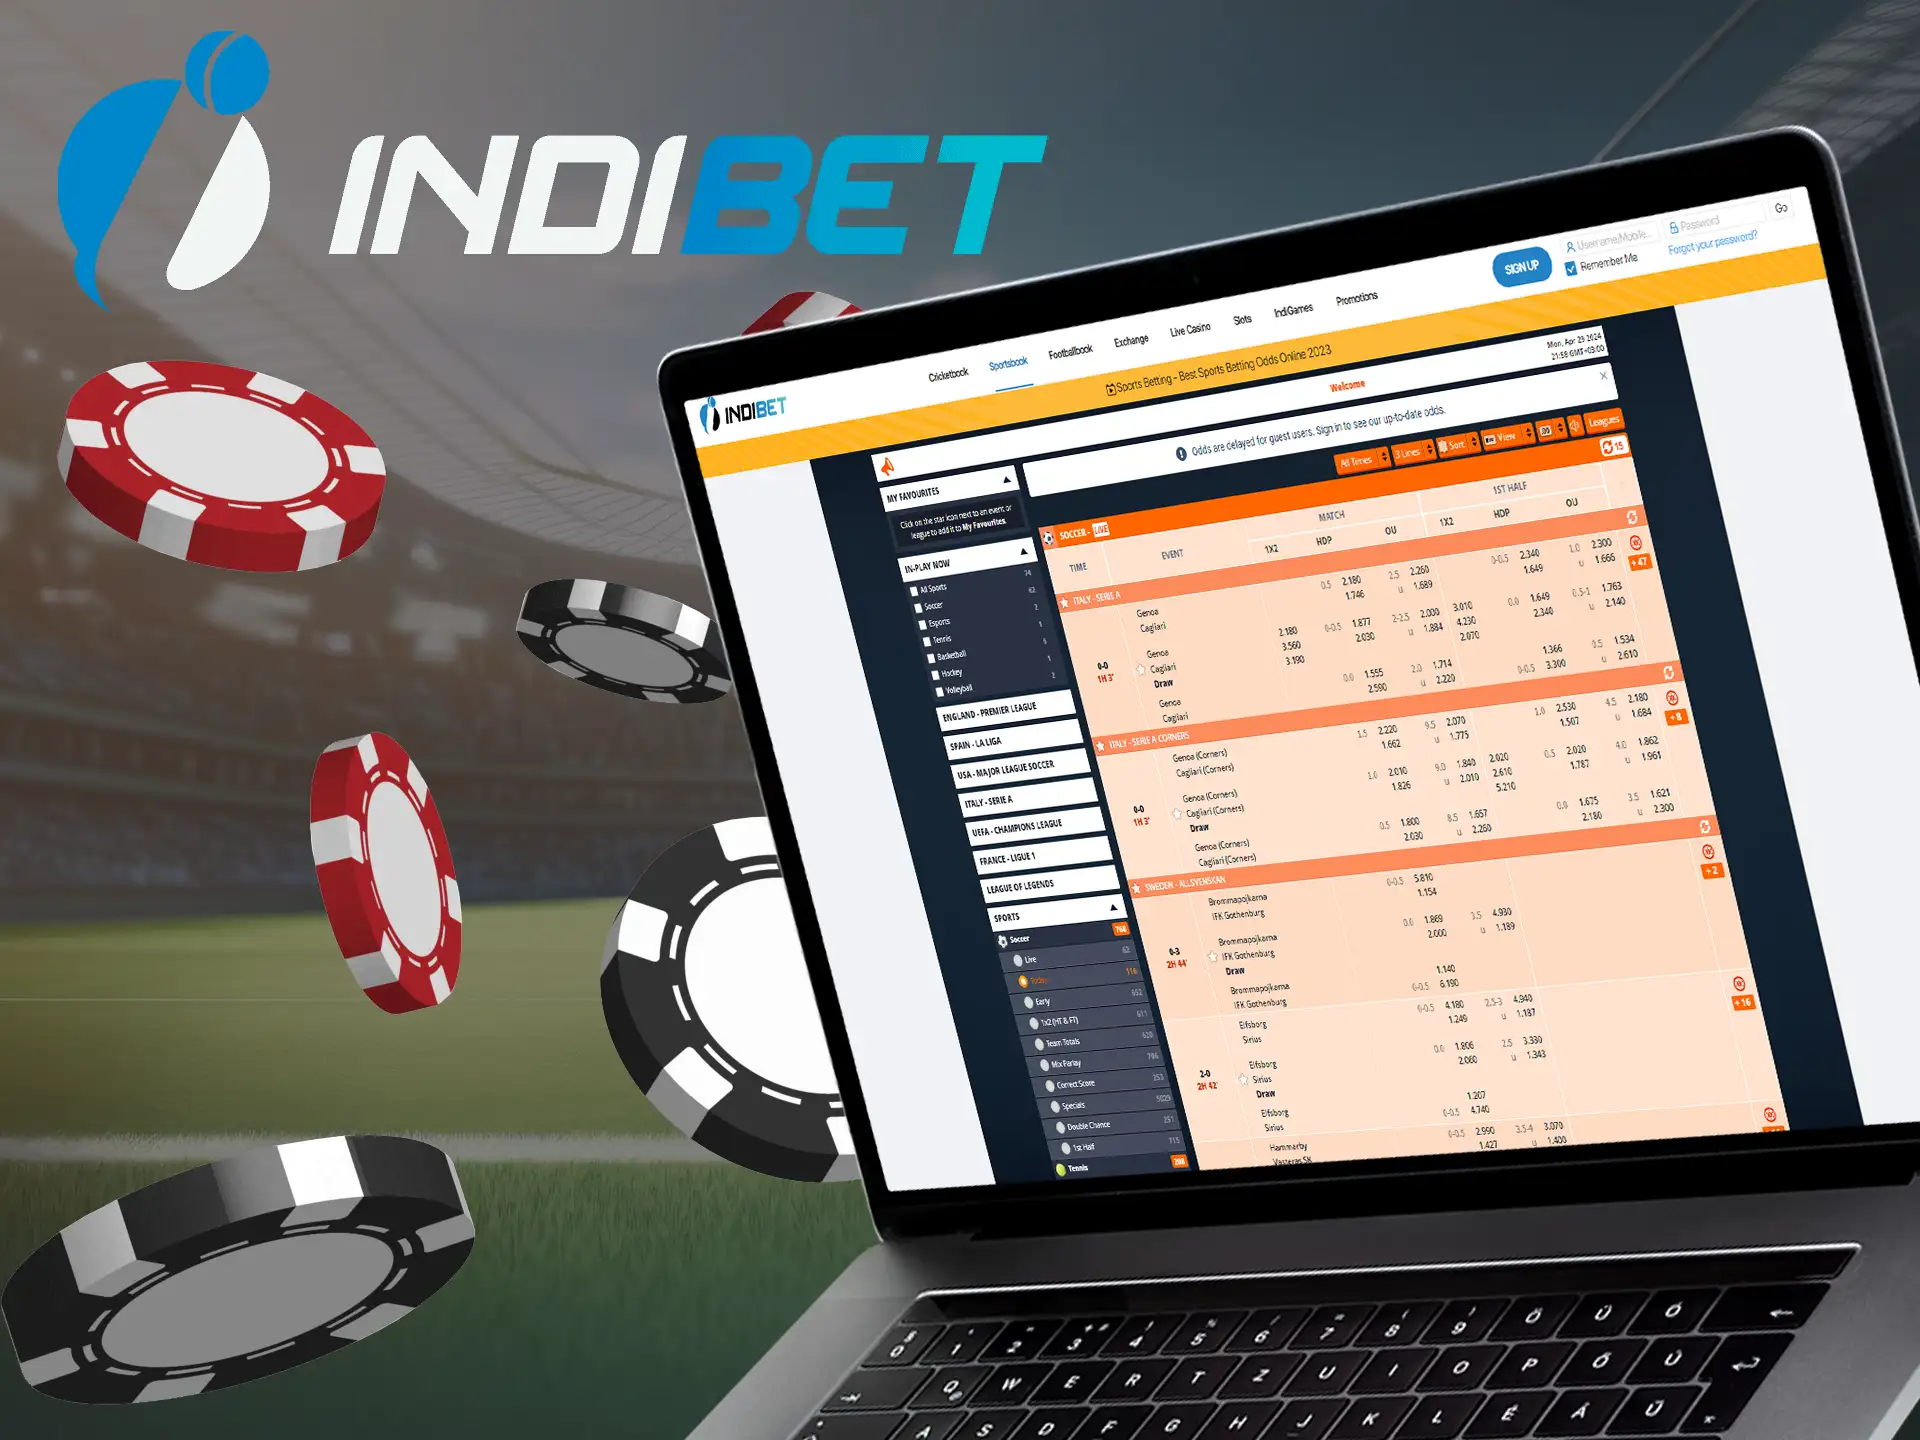 You don't need to download any additional software with Indibet's intuitive and simple website.